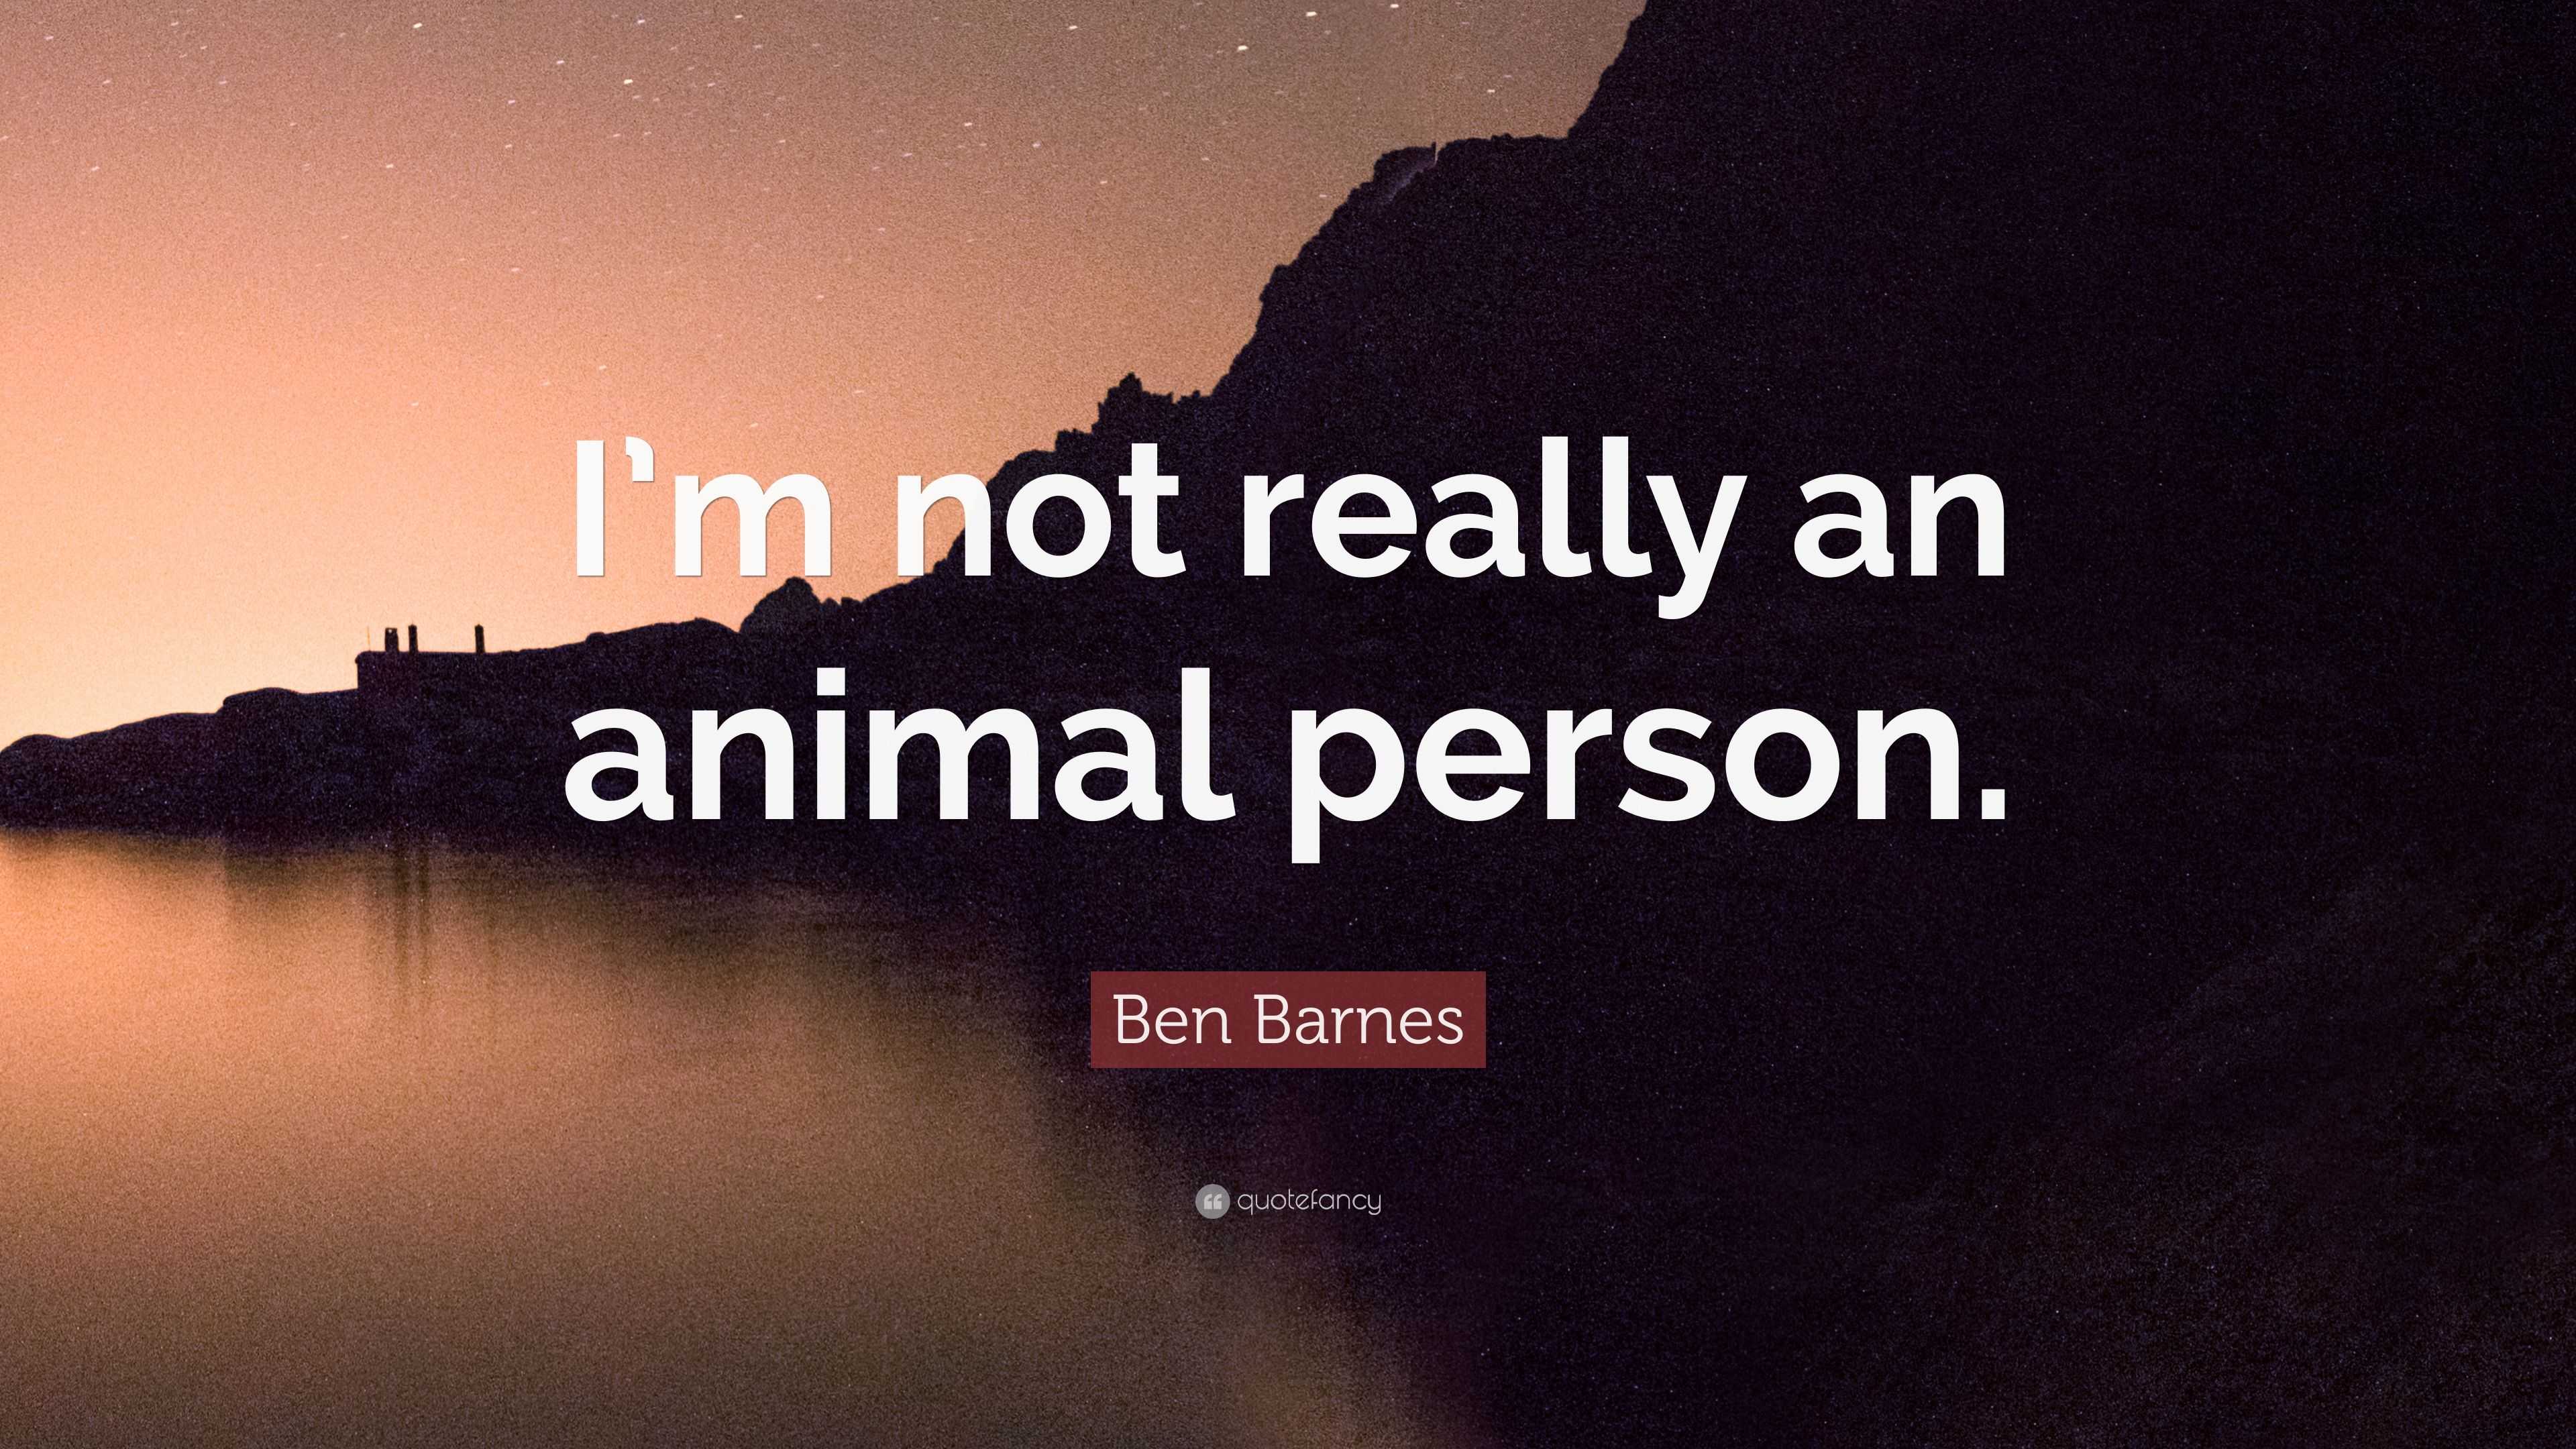 Ben Barnes Quote: “I'm not really an animal person.”